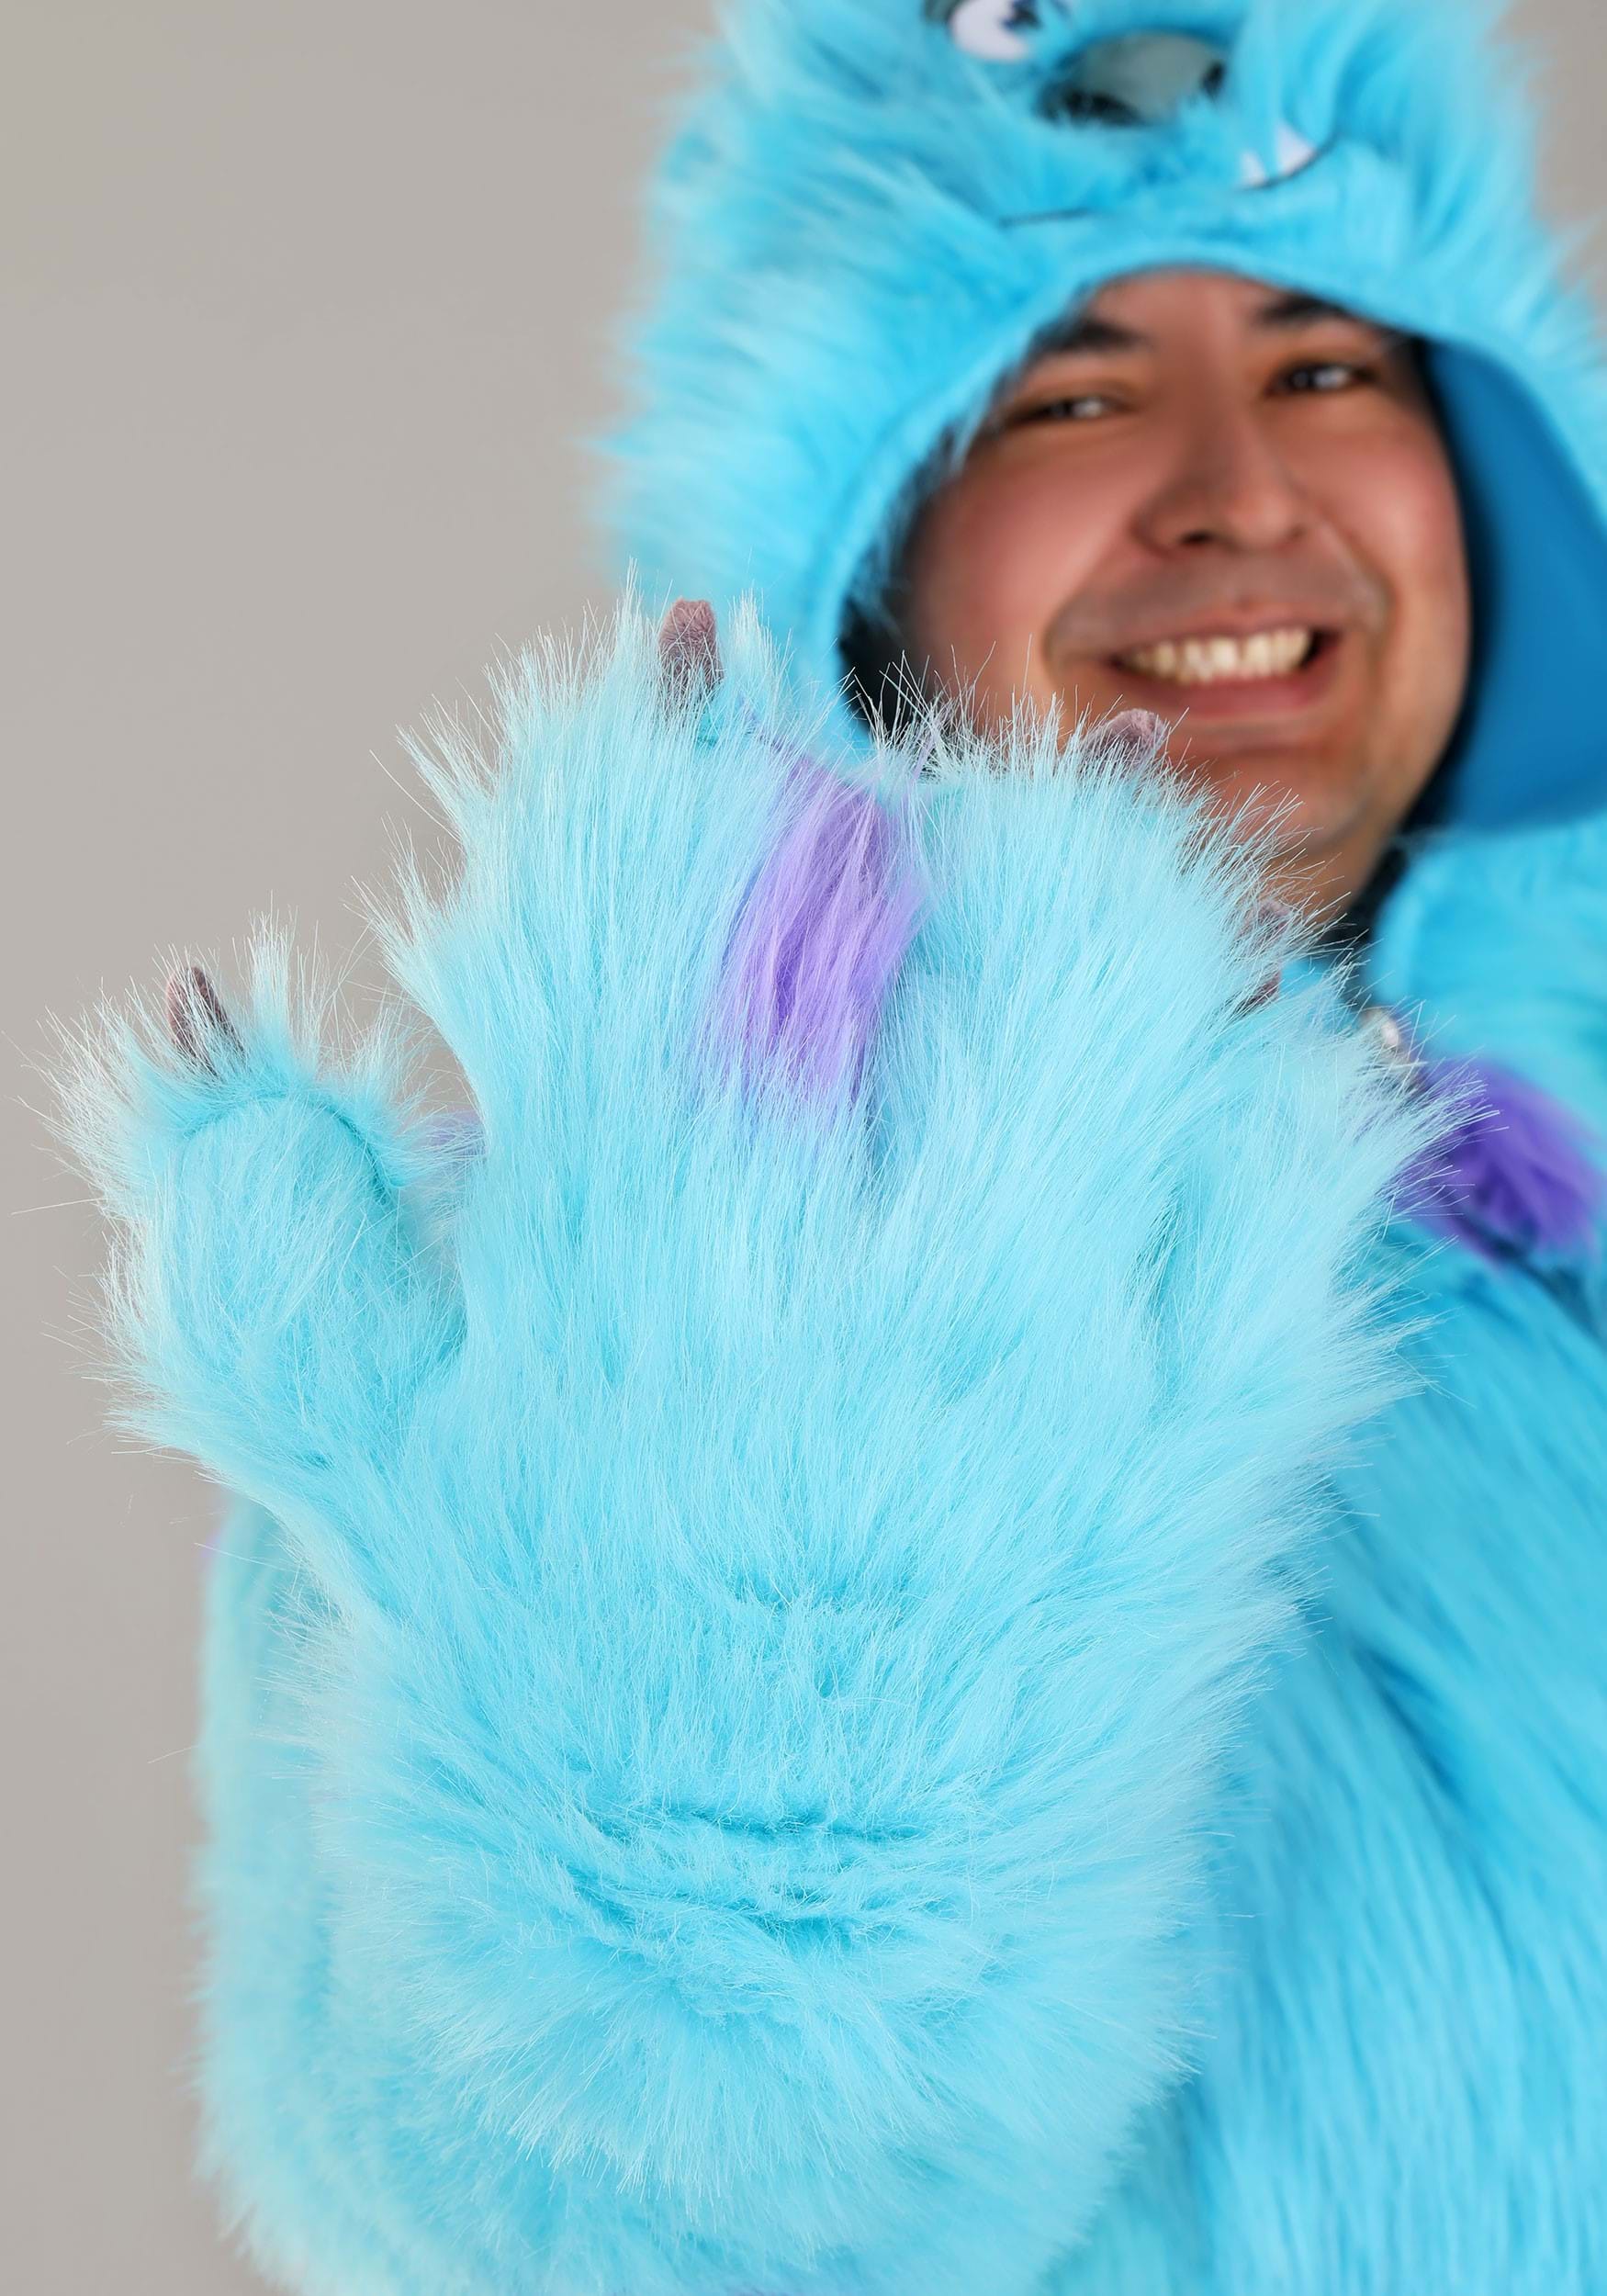 Plus Size Hooded Monsters Inc Sulley Costume For Adults , Disney Costumes